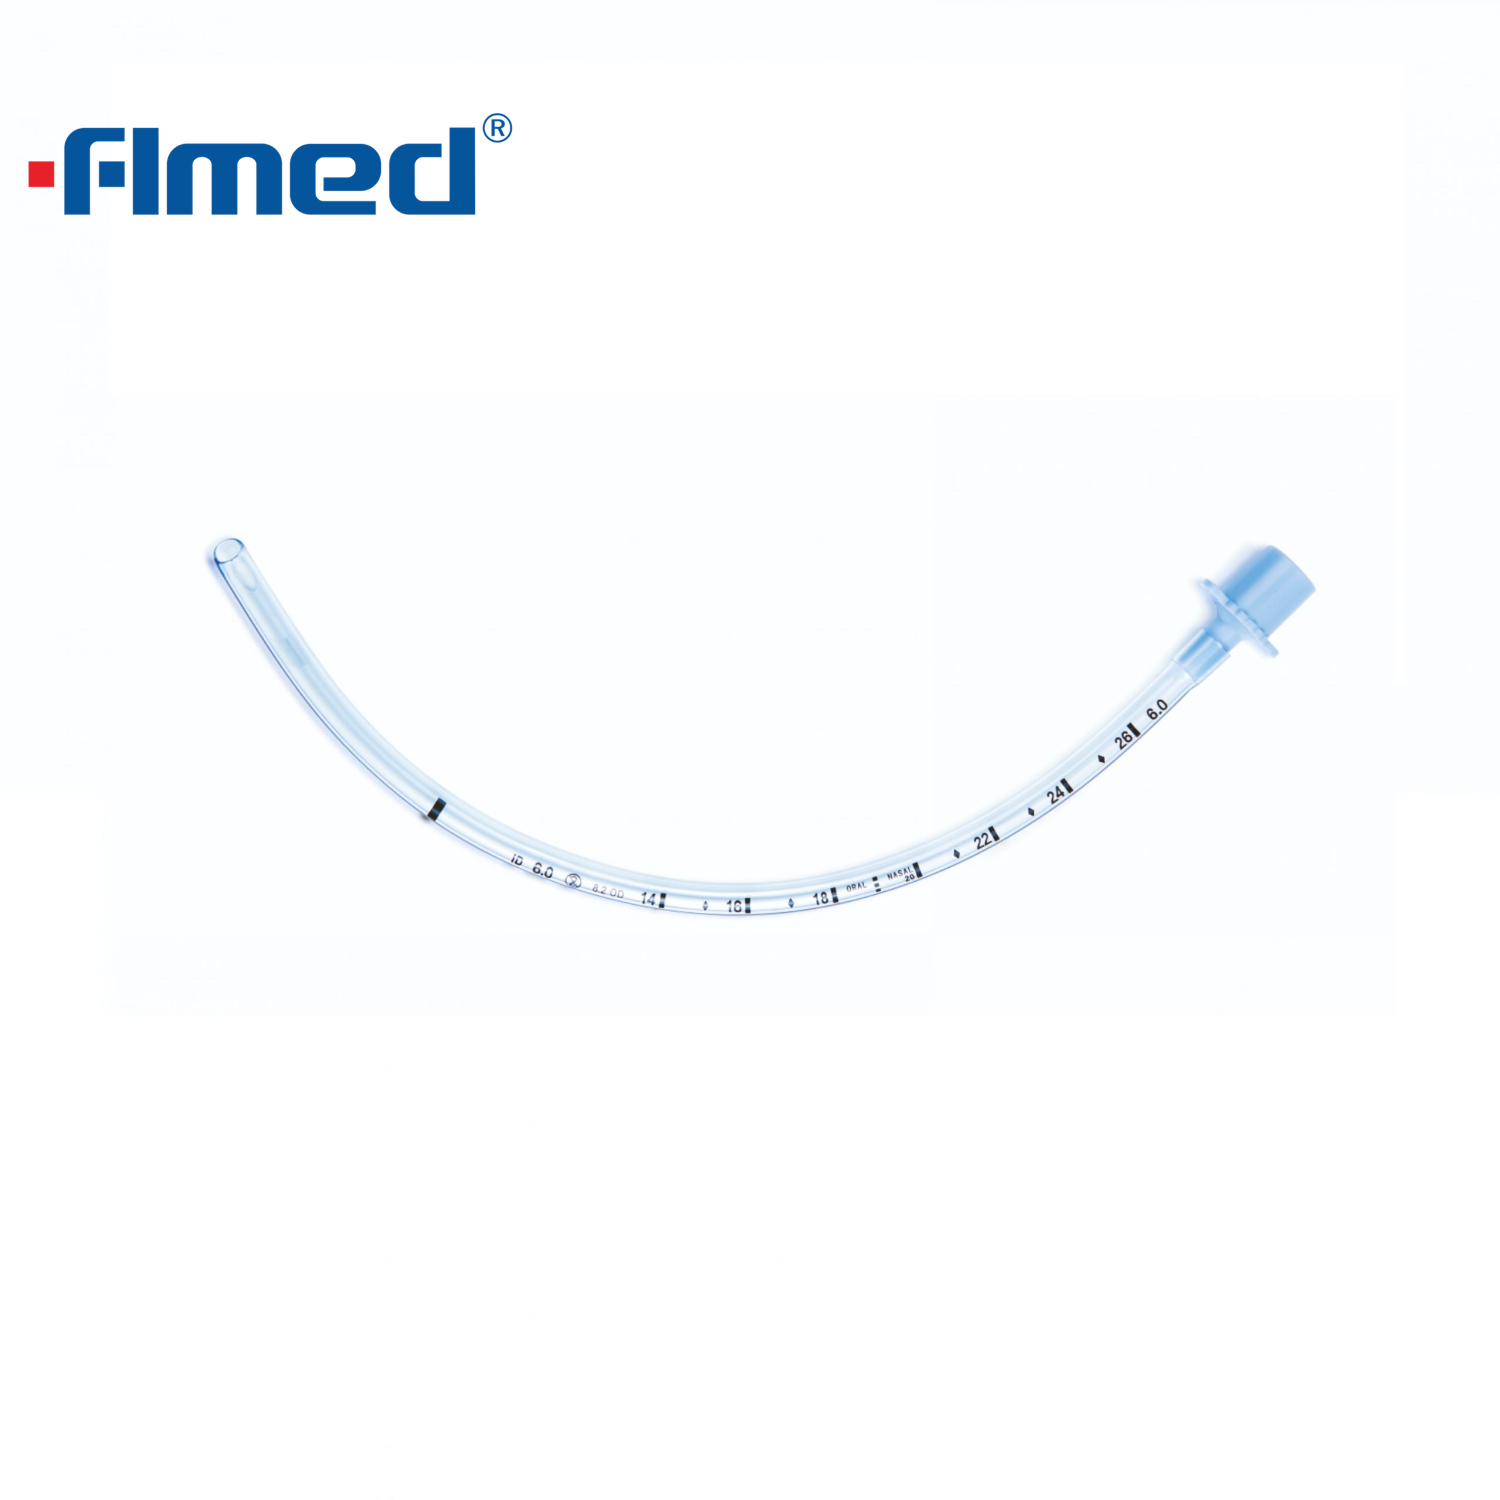 Reinforced Tracheal Tube with Low Pressure Cuff